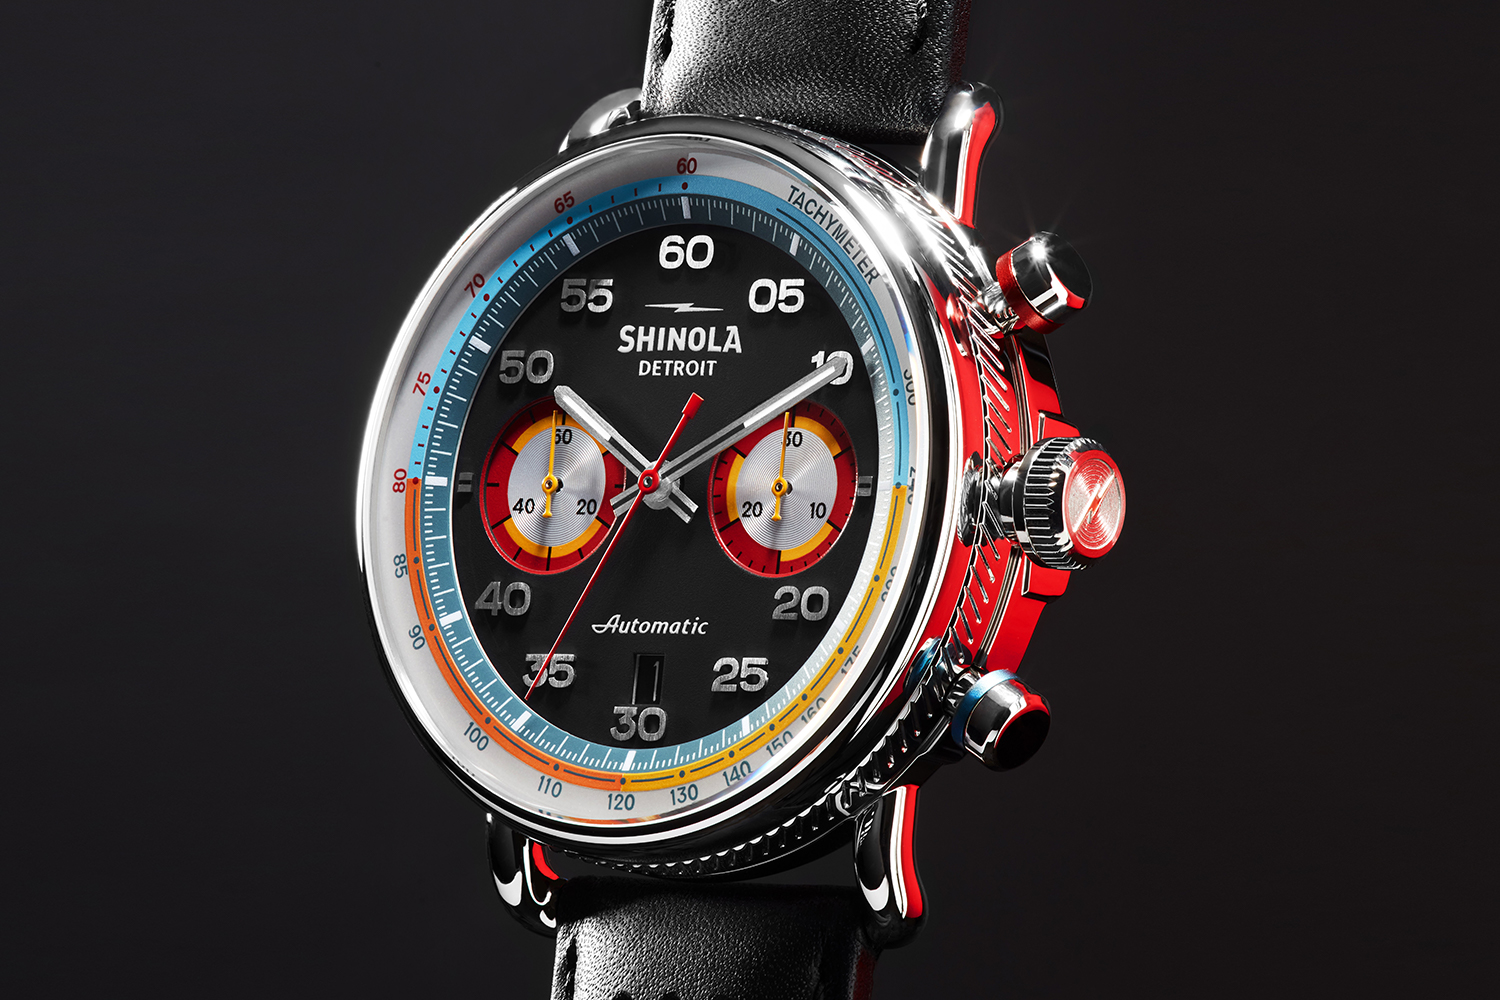 The Shinola Canfield Speedway, the watch brand's first automatic chronograph. The timepiece sold out in less than 24 hours.